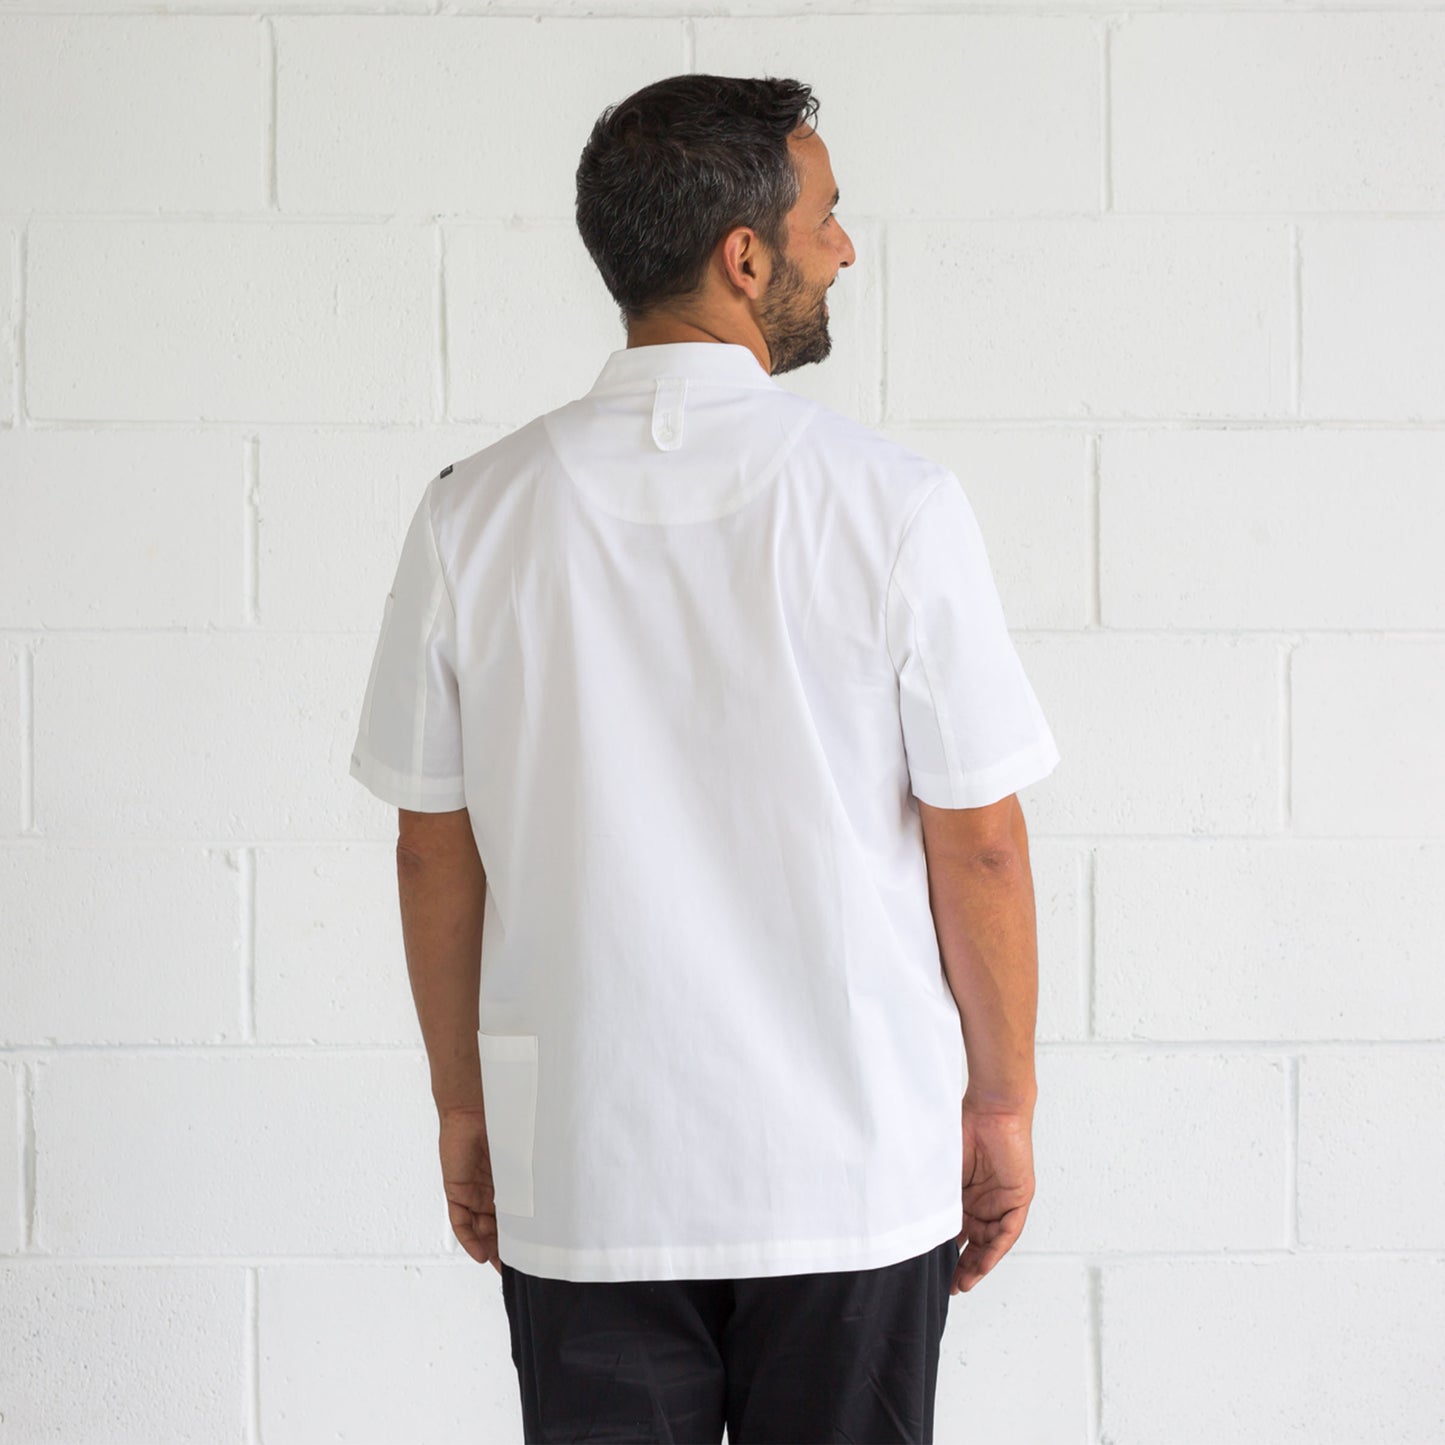 Men's short sleeve Supercool chef jacket made from Organic cotton